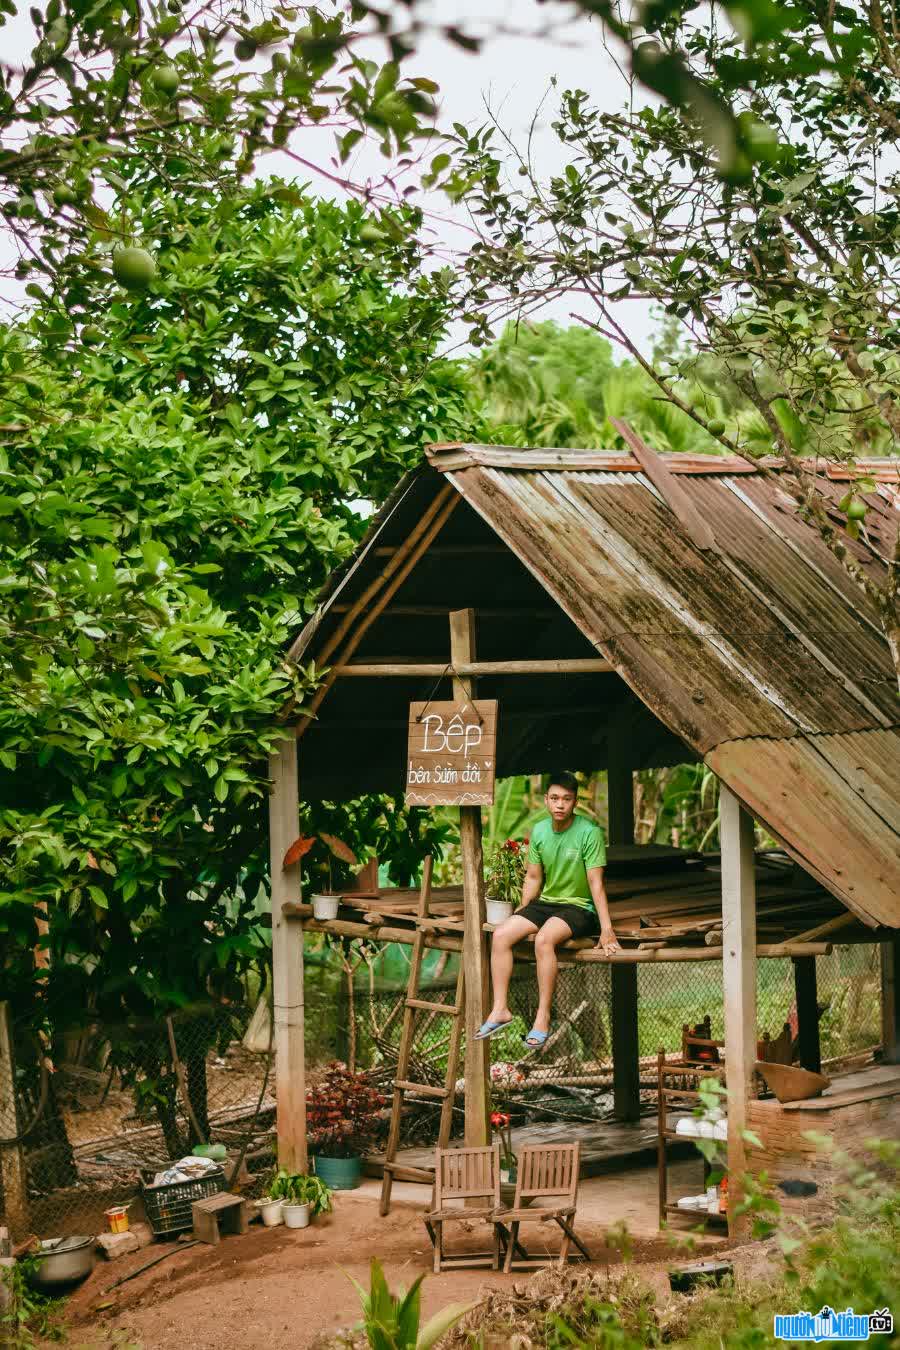 "The kitchen on the hillside" is where Duy Tai cooks delicious dishes for his parents